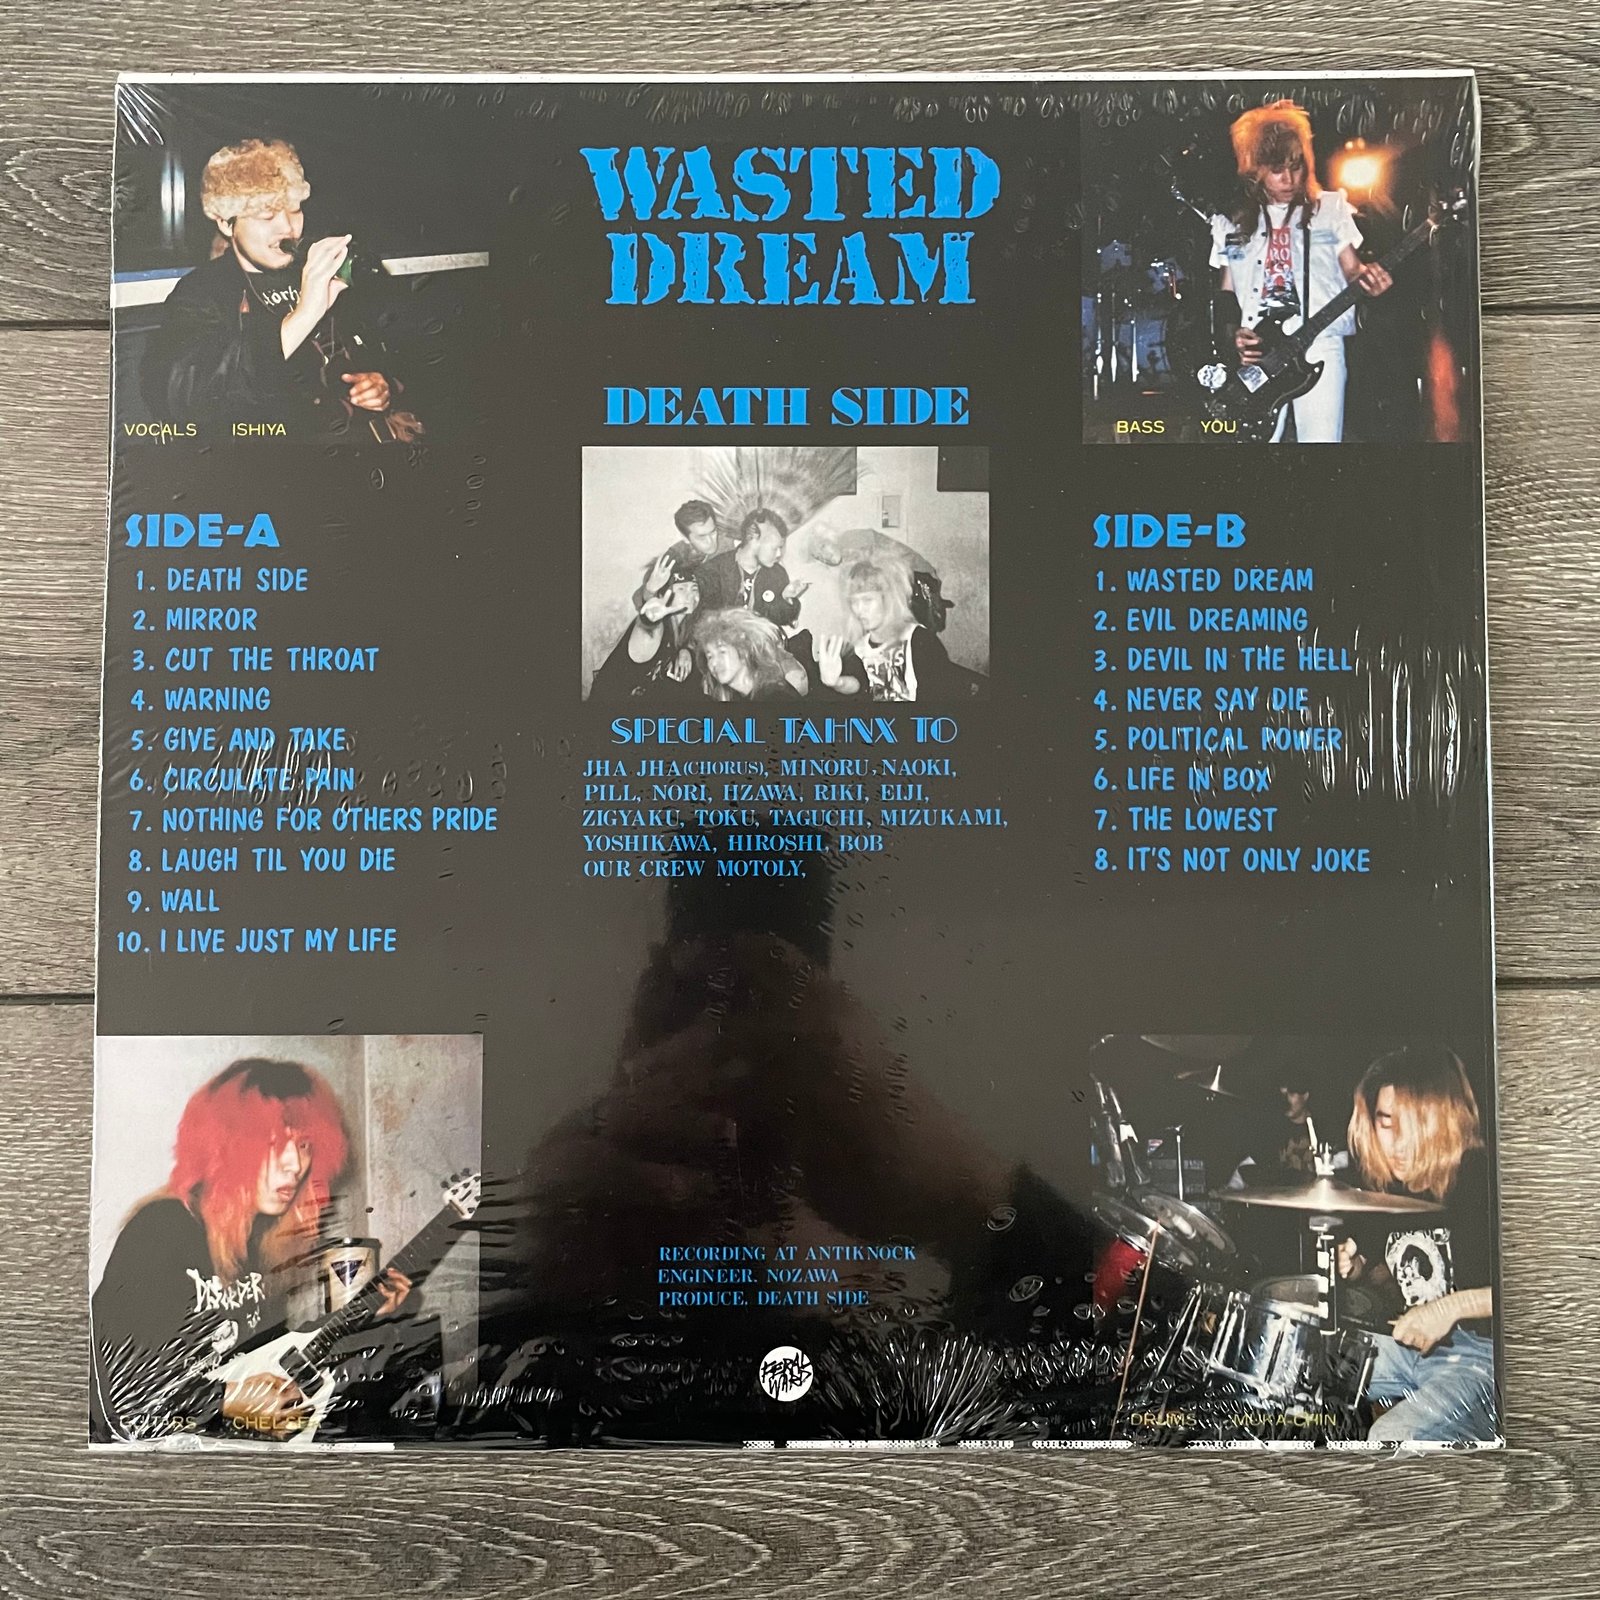 DEATH SIDE wasted dream レコード - 邦楽